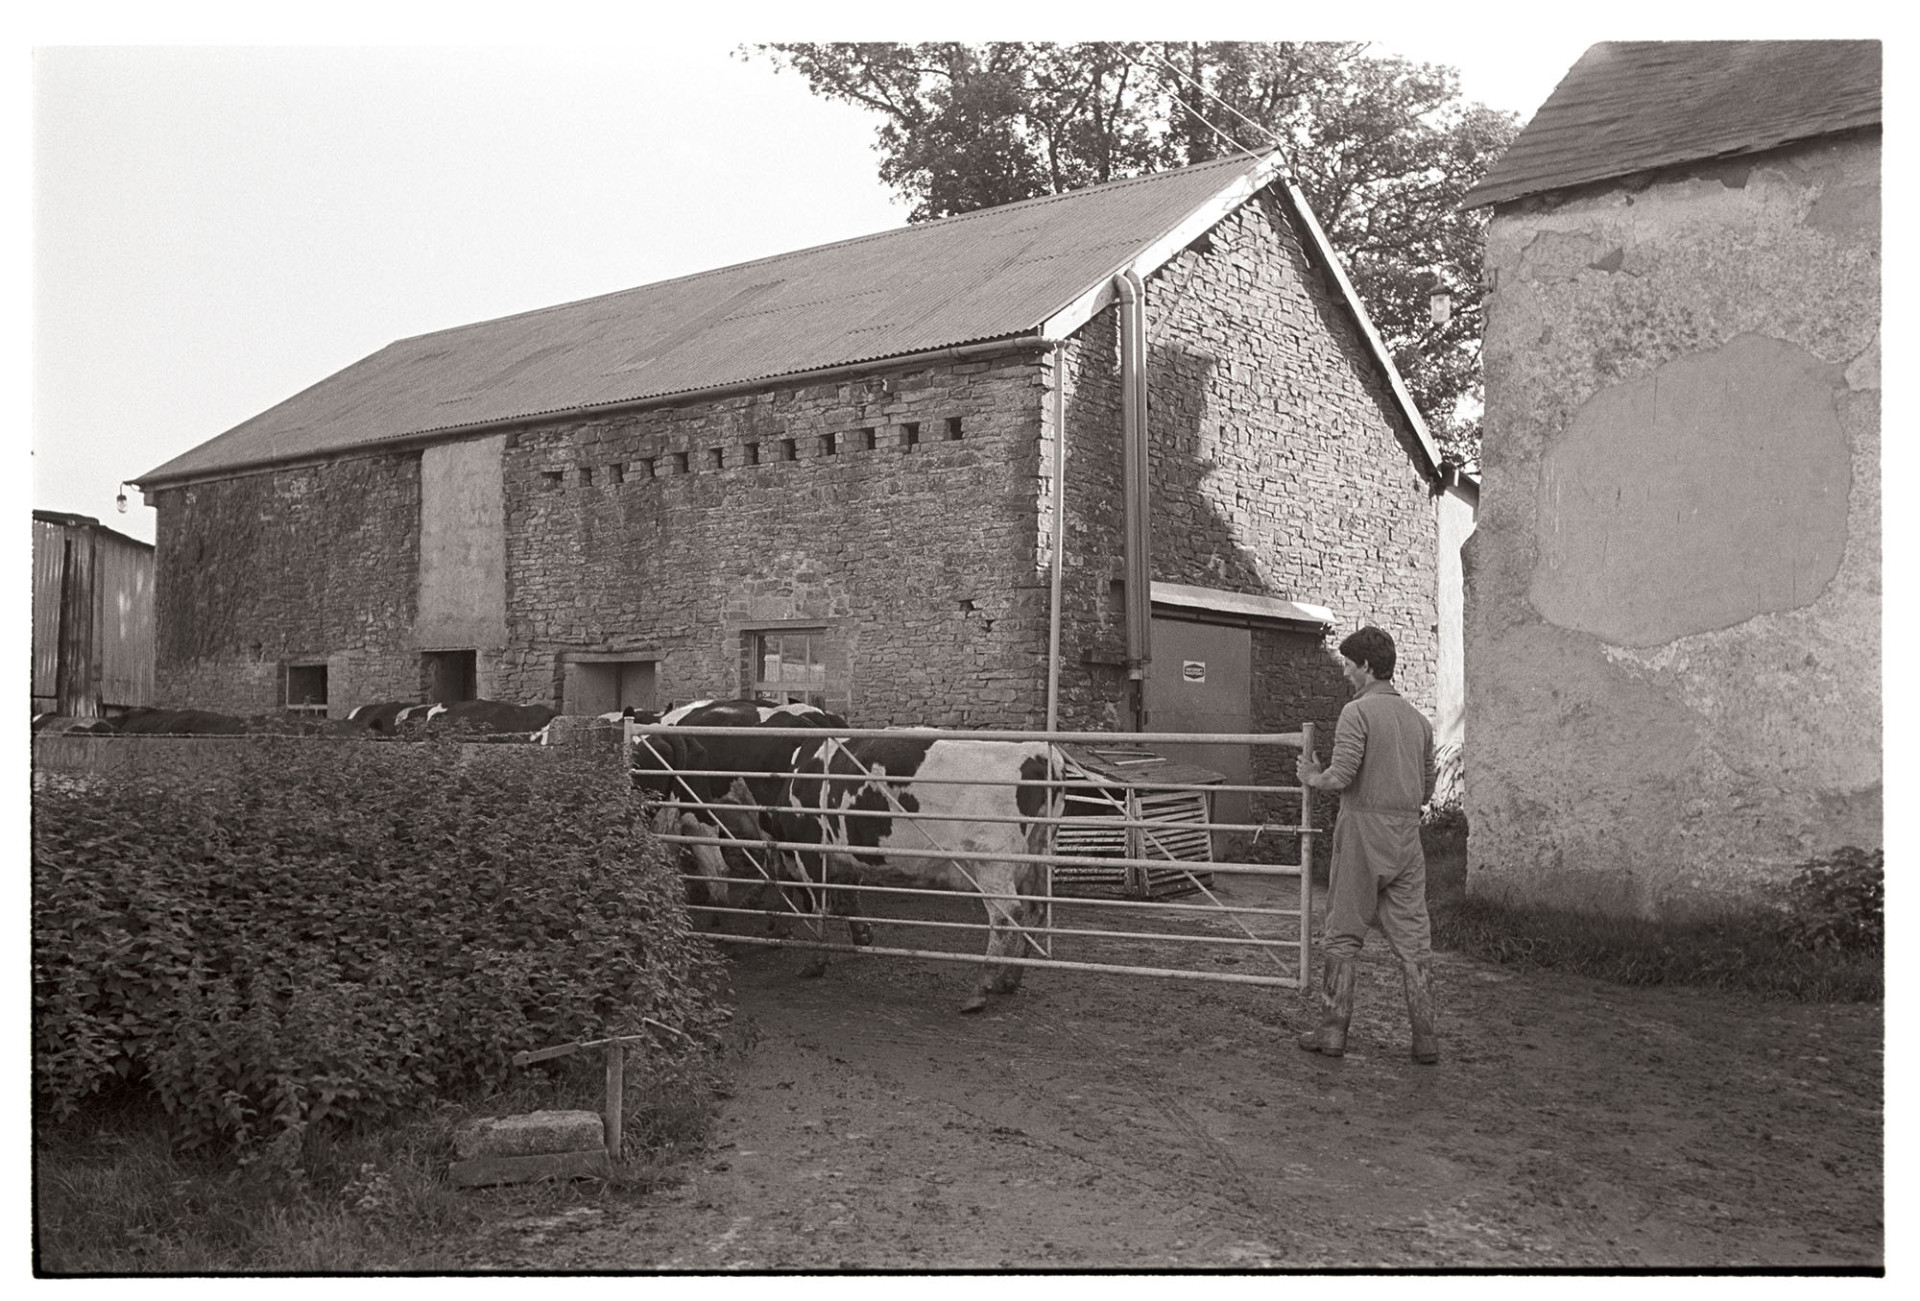 Cows going to be milked past large woodpile. 
[A man herding cows into a farmyard, past a stone barn with pigeon holes, to be milked, near Northlew, Beaworthy. The man is closing a gate behind the cows.]